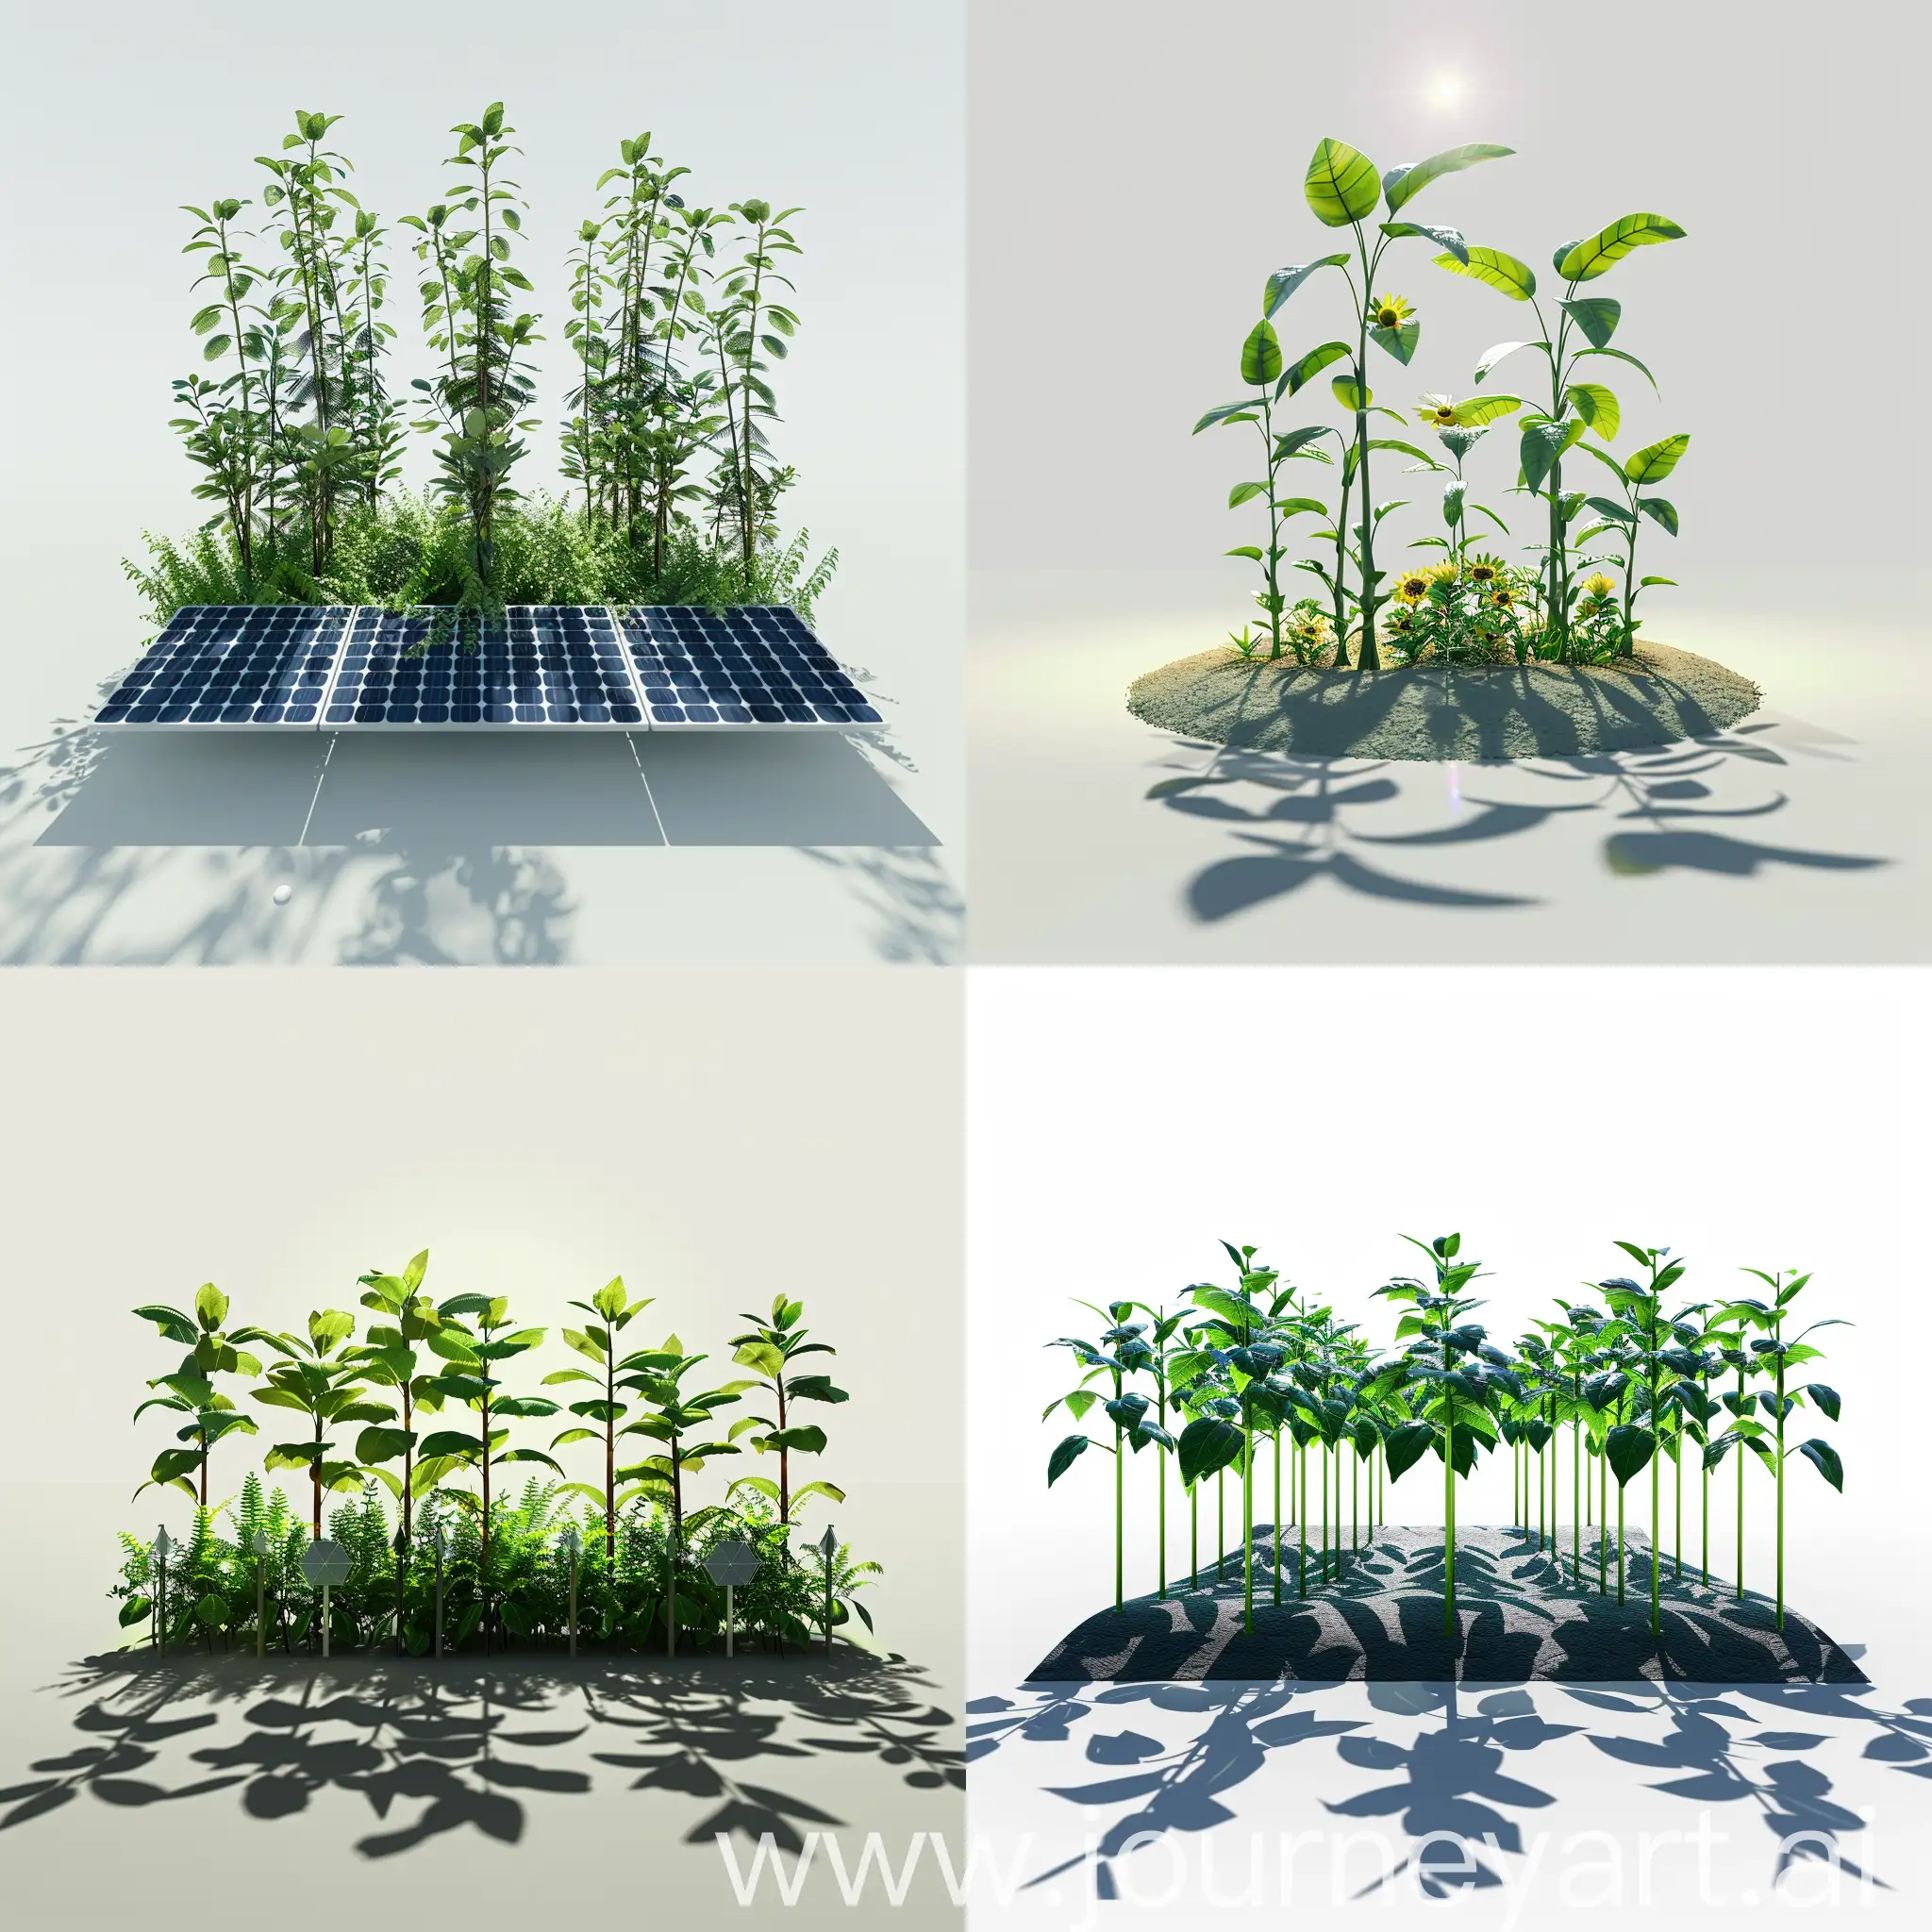 sustainable solar energy, with plants coming out from behind the image, realistic 3D animation, icon, smooth background, shadow of the image on the ground, disney and pixar rendering, central focus on the icon, ultrarealistic, white solid color background